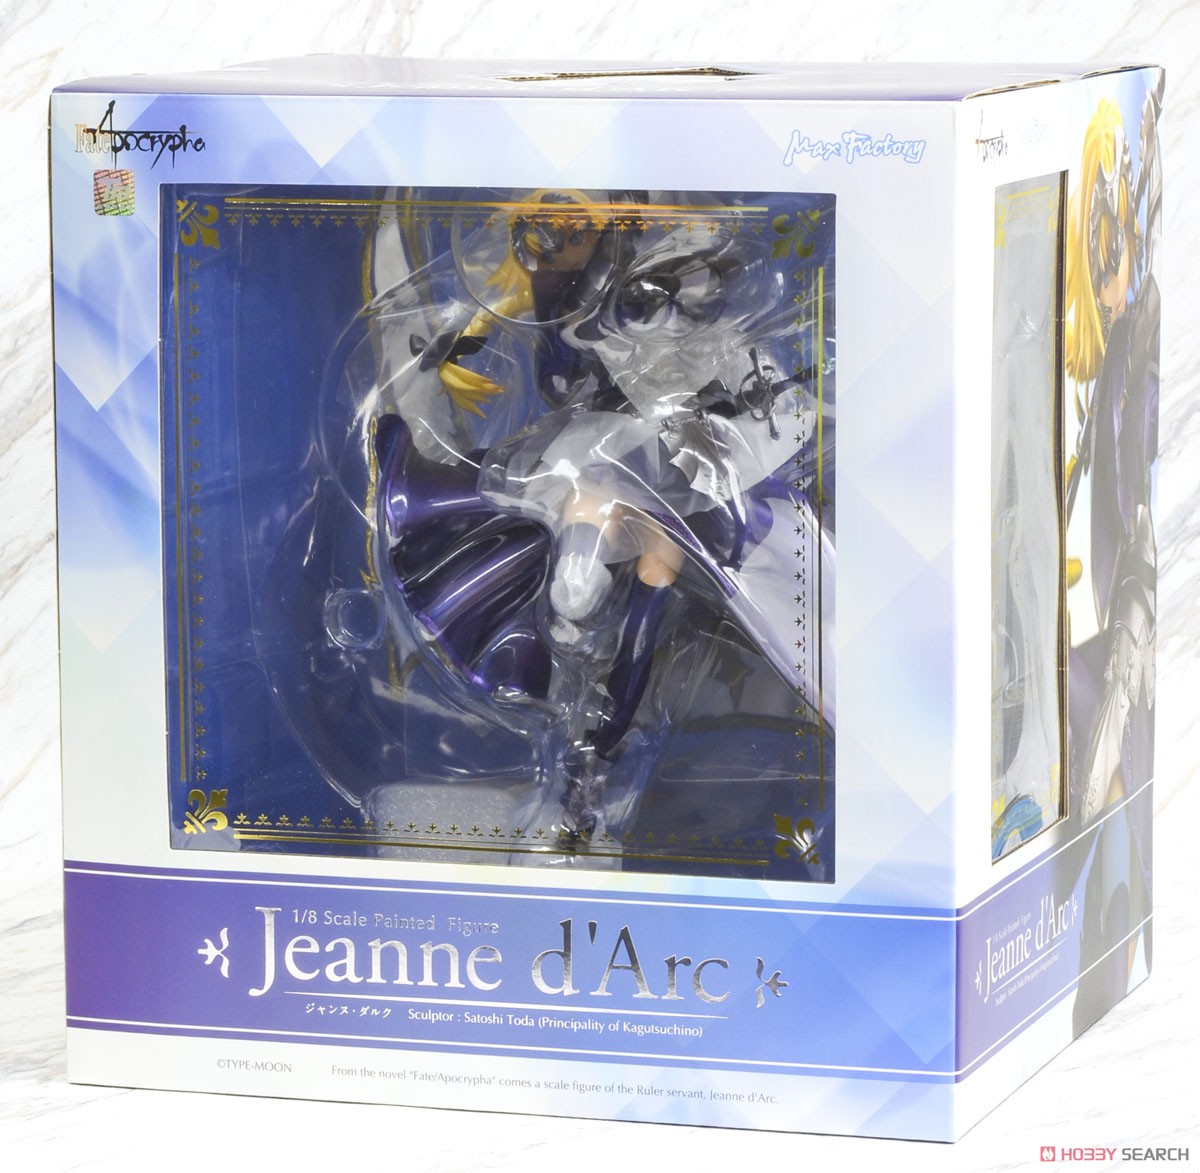 Jeanne D Arc, Ruler Figure, Fate /Apocrypha, 1/8 Scale Painted Figure, Max Factory